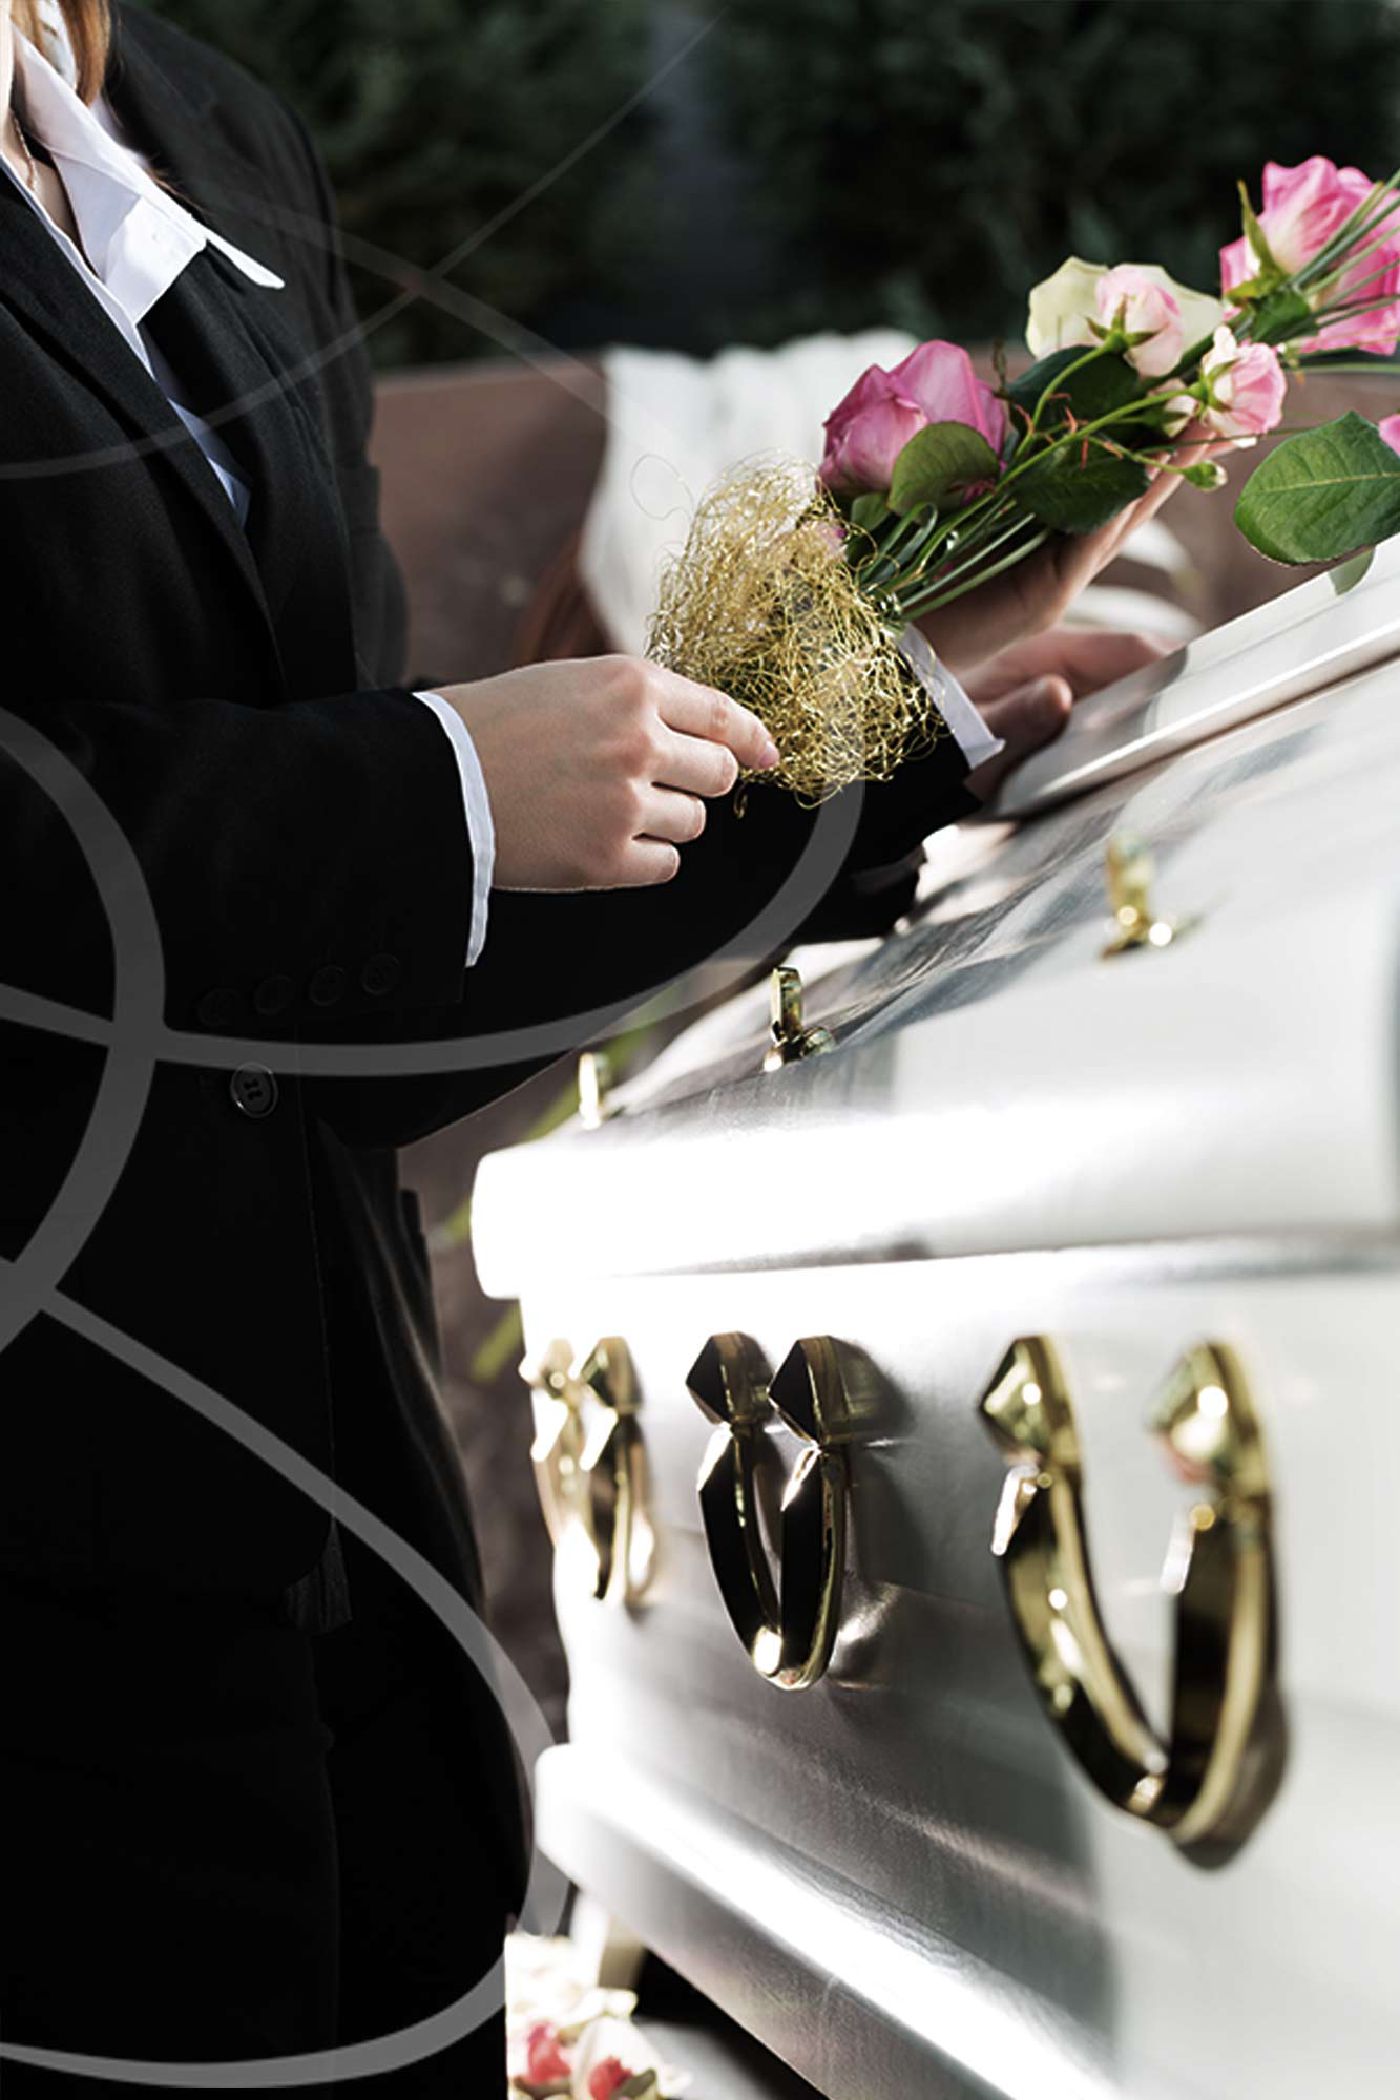 Afterlife Funerals is a family owned and operated funeral home providing independent personalised funerals services throughout the greater Sydney area. Services include cremation, burial, repatriation, and pre planning. Management and staff are available 24/7, 365 days per year. Our brands include: Breana Liu Funeral Services, LGBTI Funerals, Funeral Associates, White Lily Funerals, Antyesti Funeral Services, Indigenous Ceremonies, Island Repatriations, Zoolatry Pet Crematorium & Funeral Fund Australia. Phone 1300273262 www.afterlifefunerals.com.au